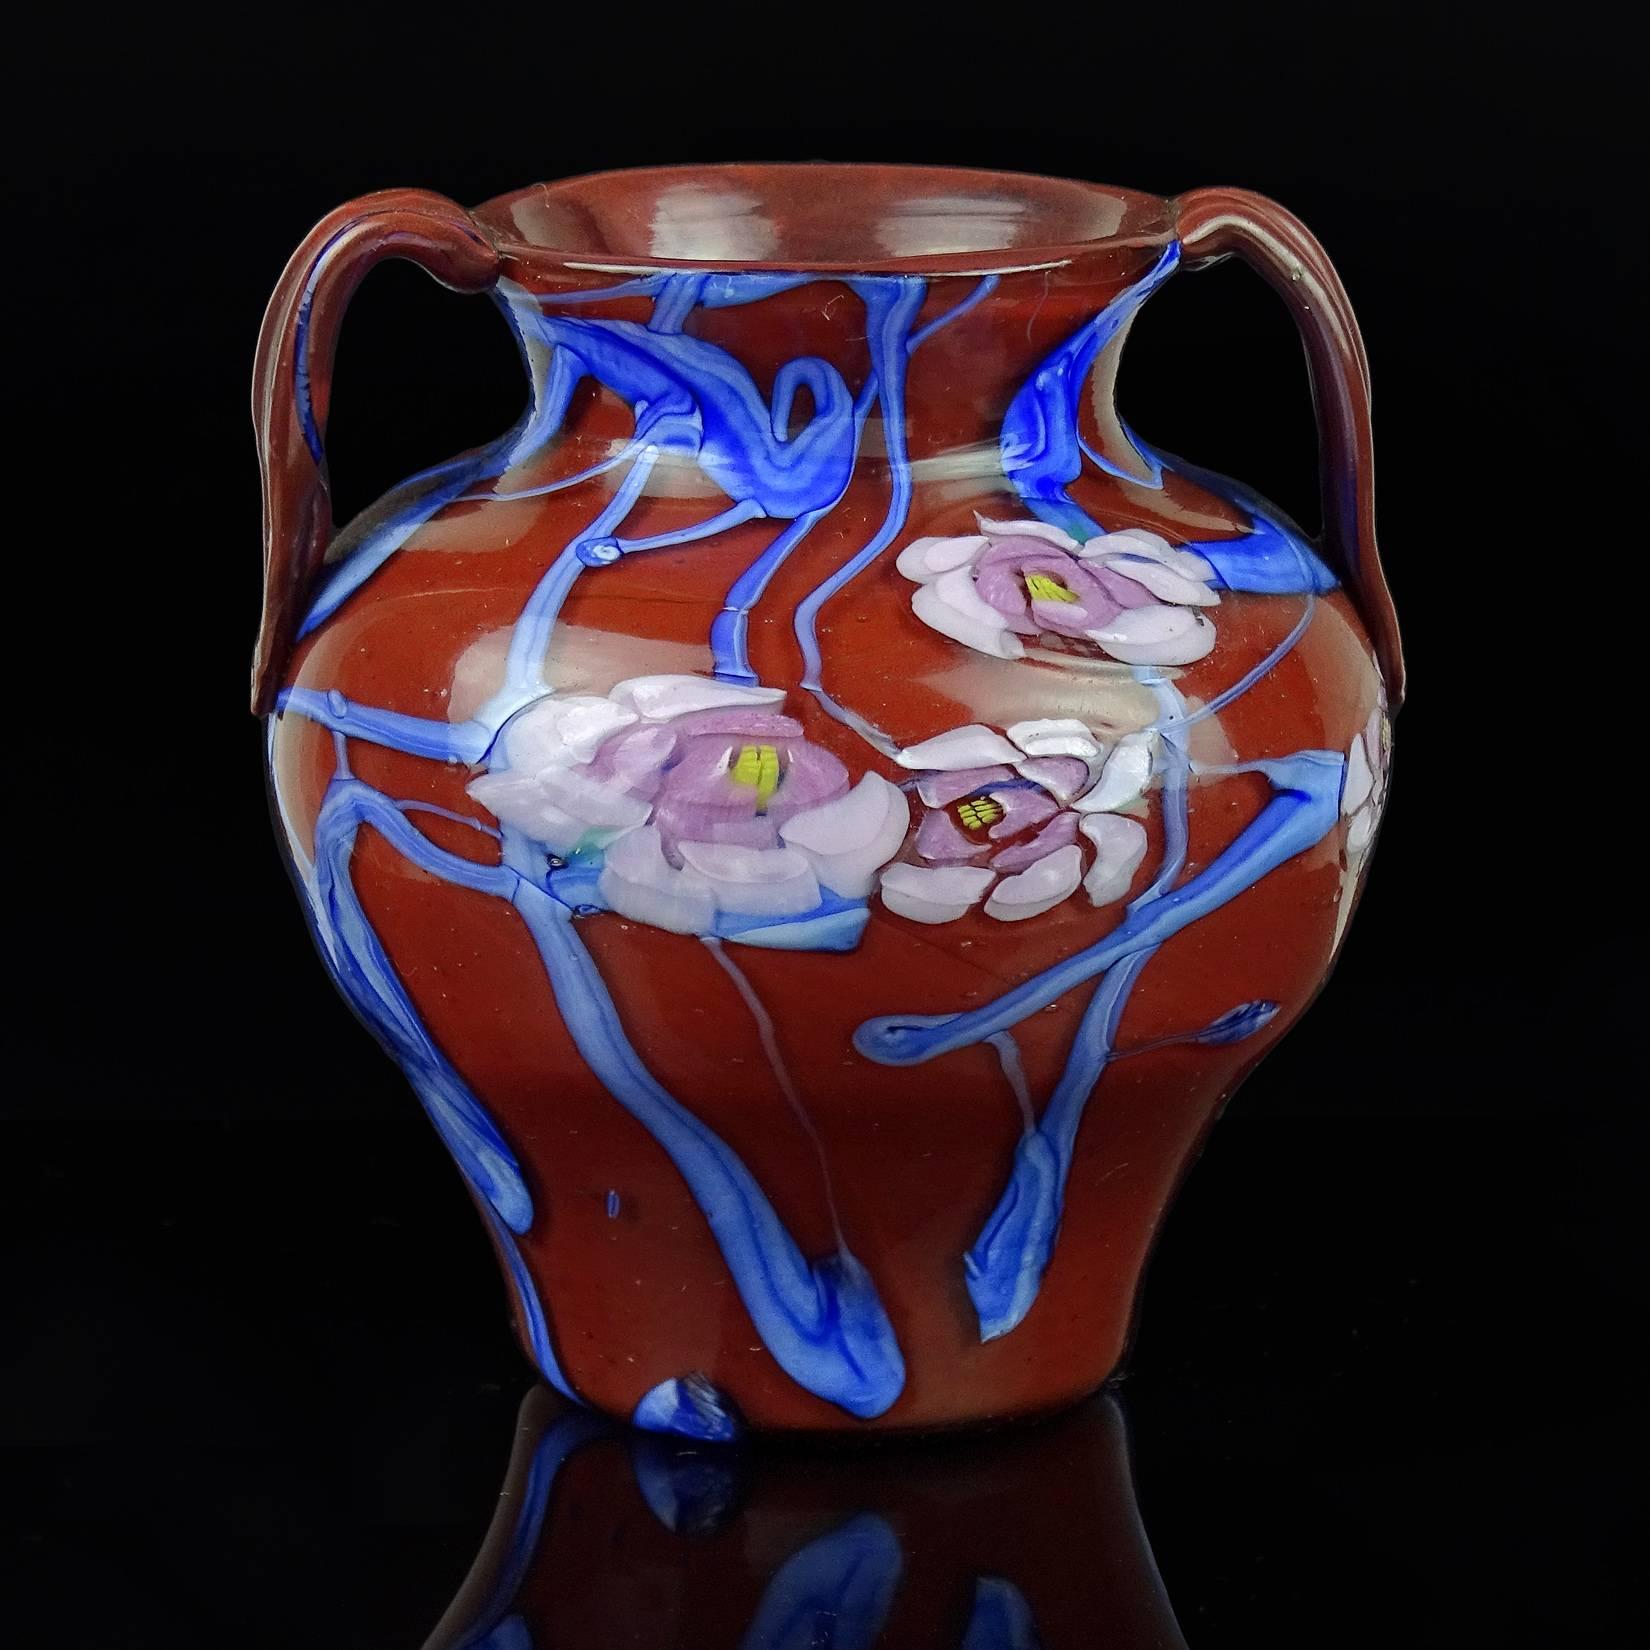 Rare Murano hand blown red, with blue tralis and pink rose murrines Italian art glass cabinet vase. Attributed to Vetreria Artisti Barovier, in the A Murrine Floreali design, circa 1920s. Measures almost 4" tall.